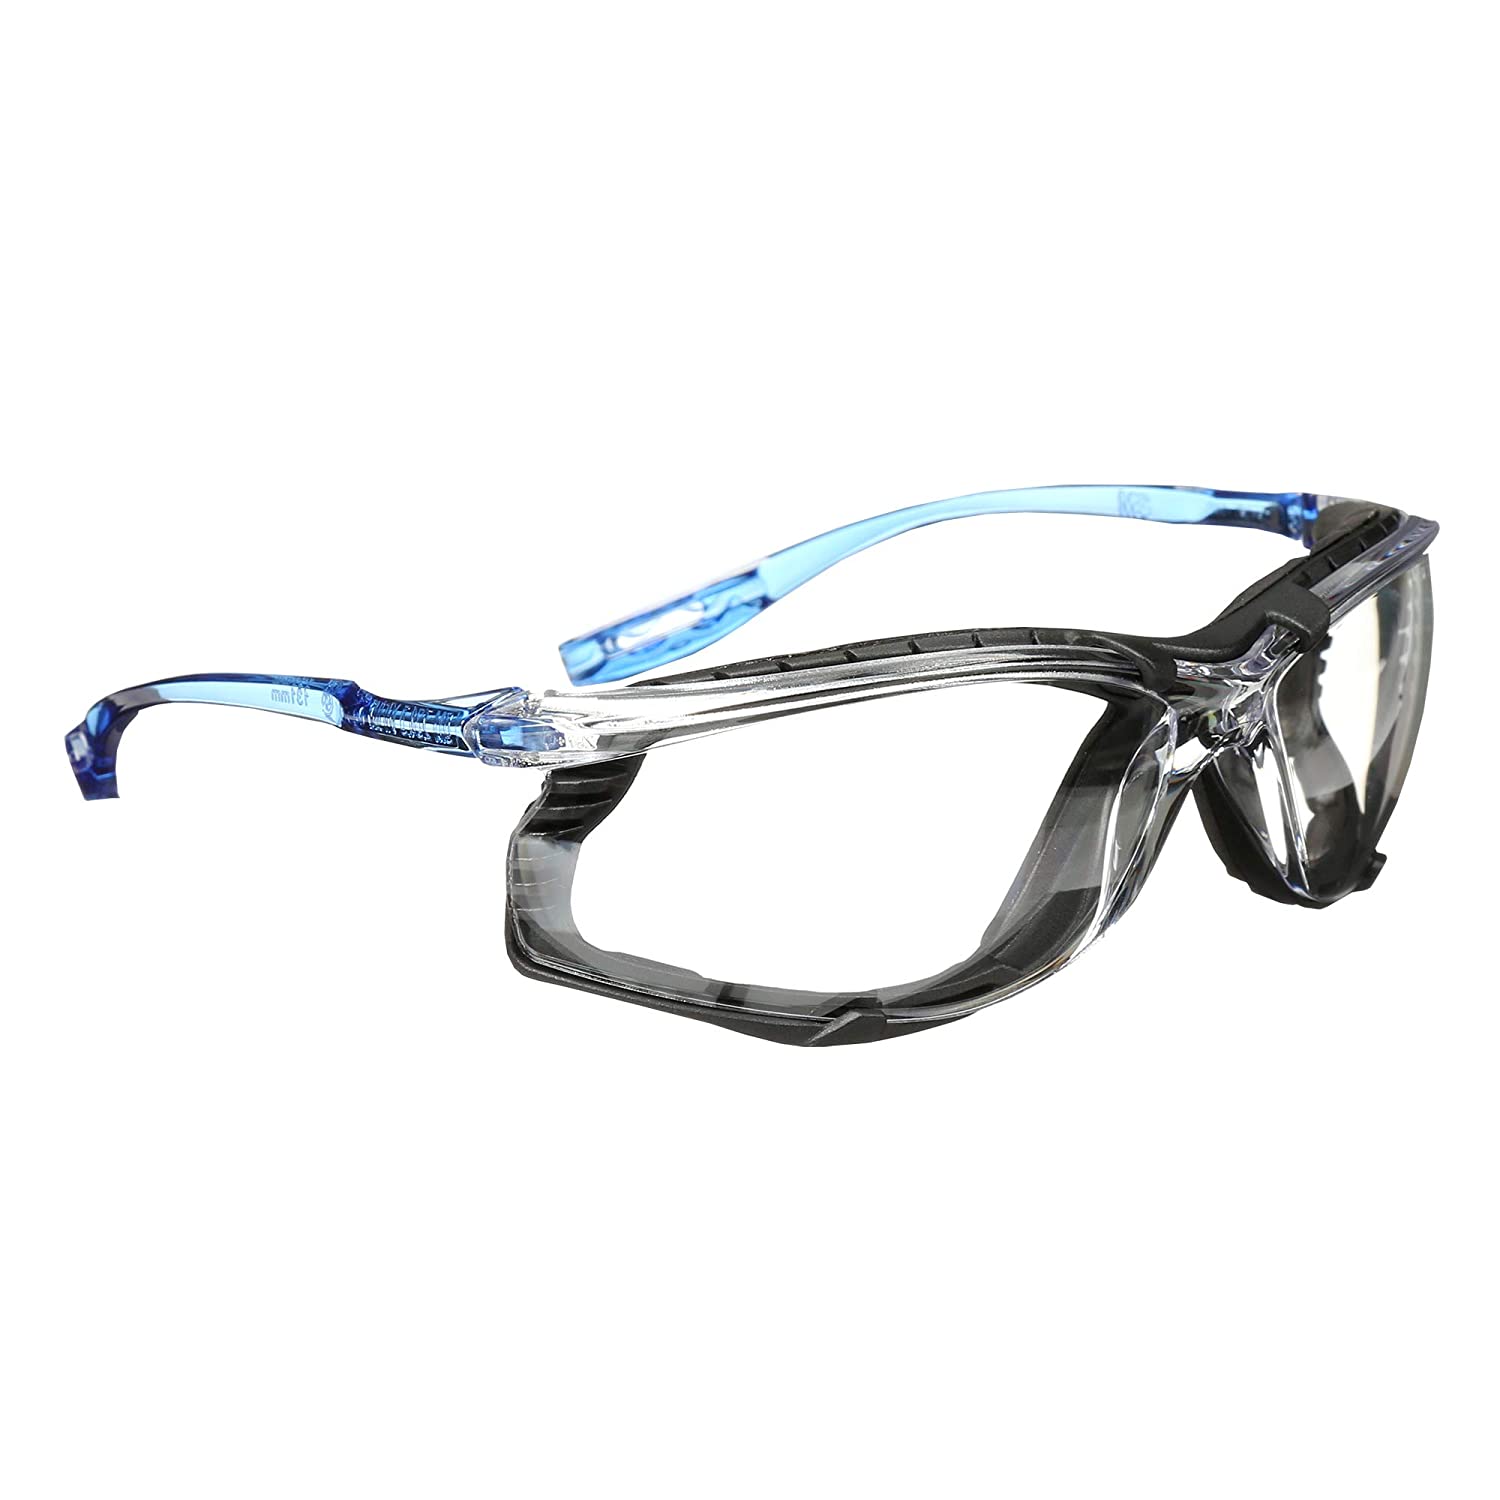 Amazon most useful home products CSS Safety Glasses.jpg